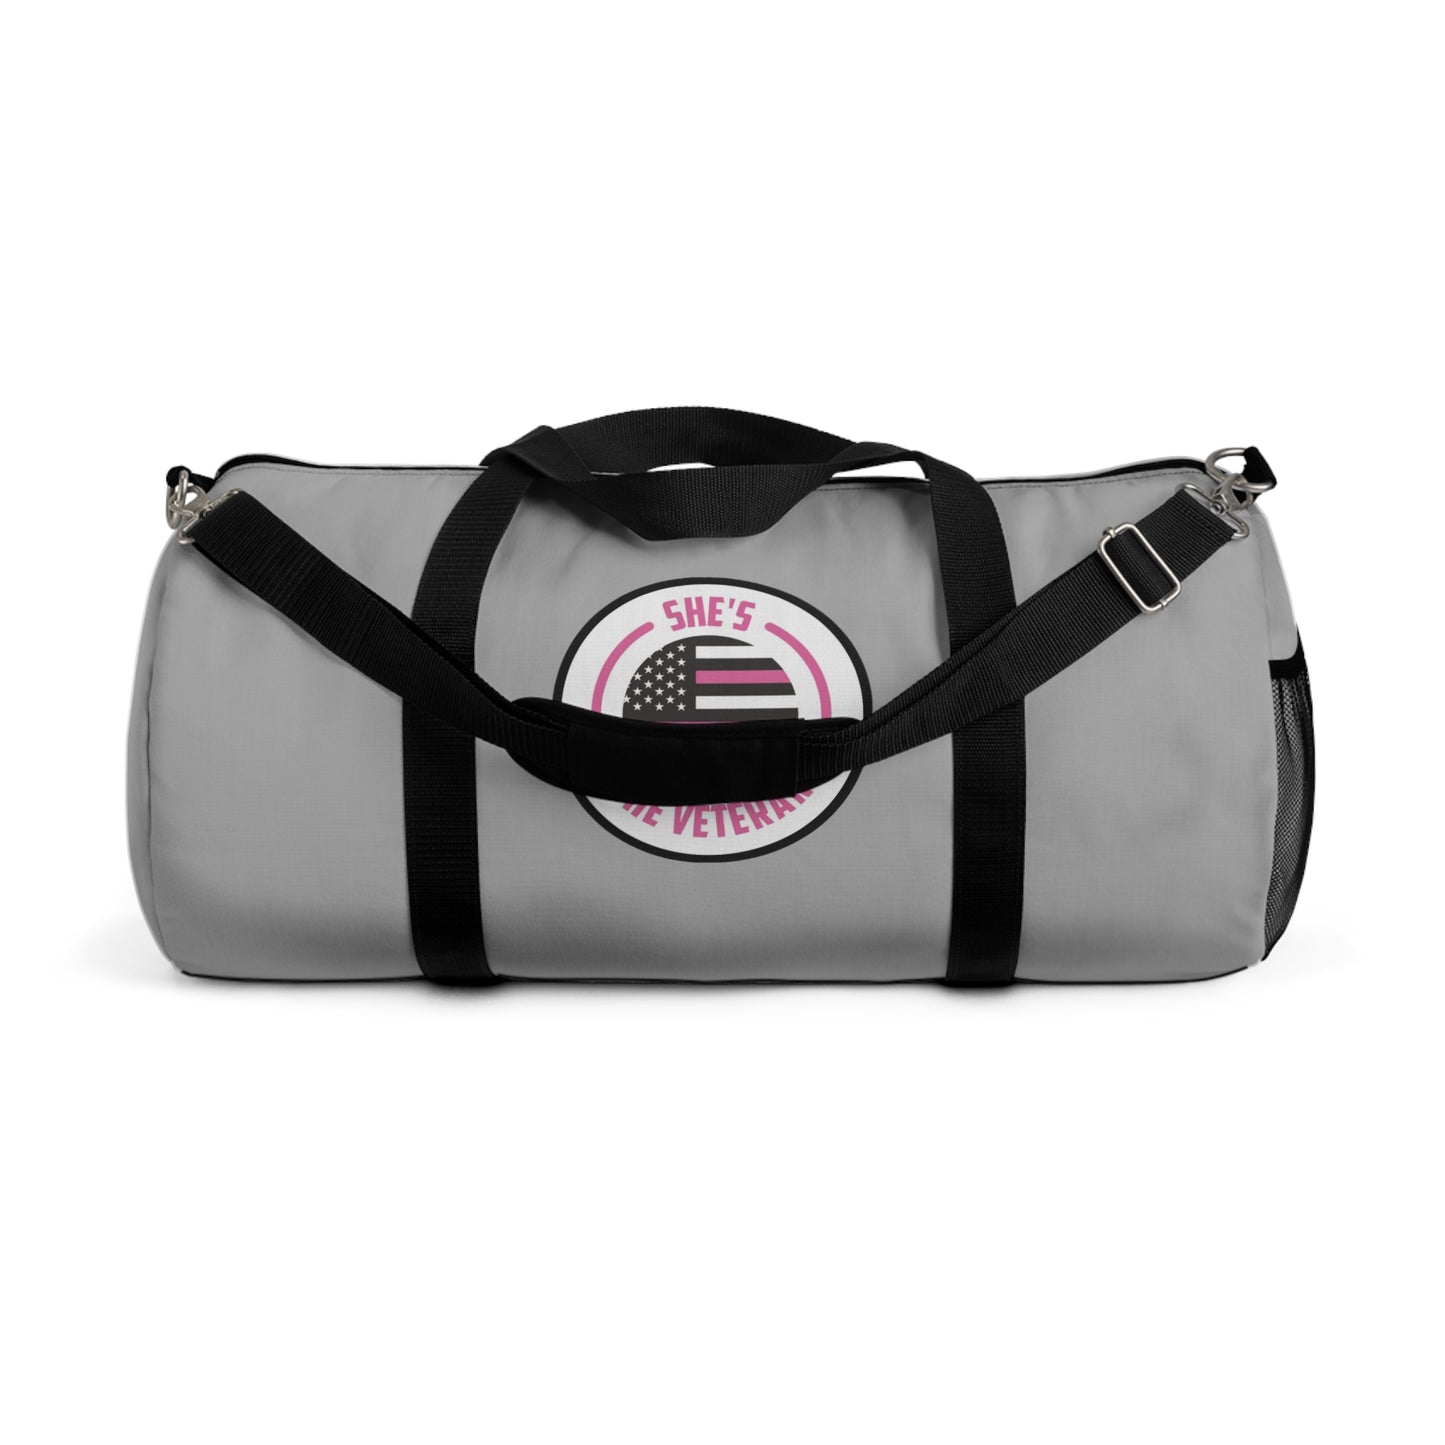 Duffel Bag with Official Logo